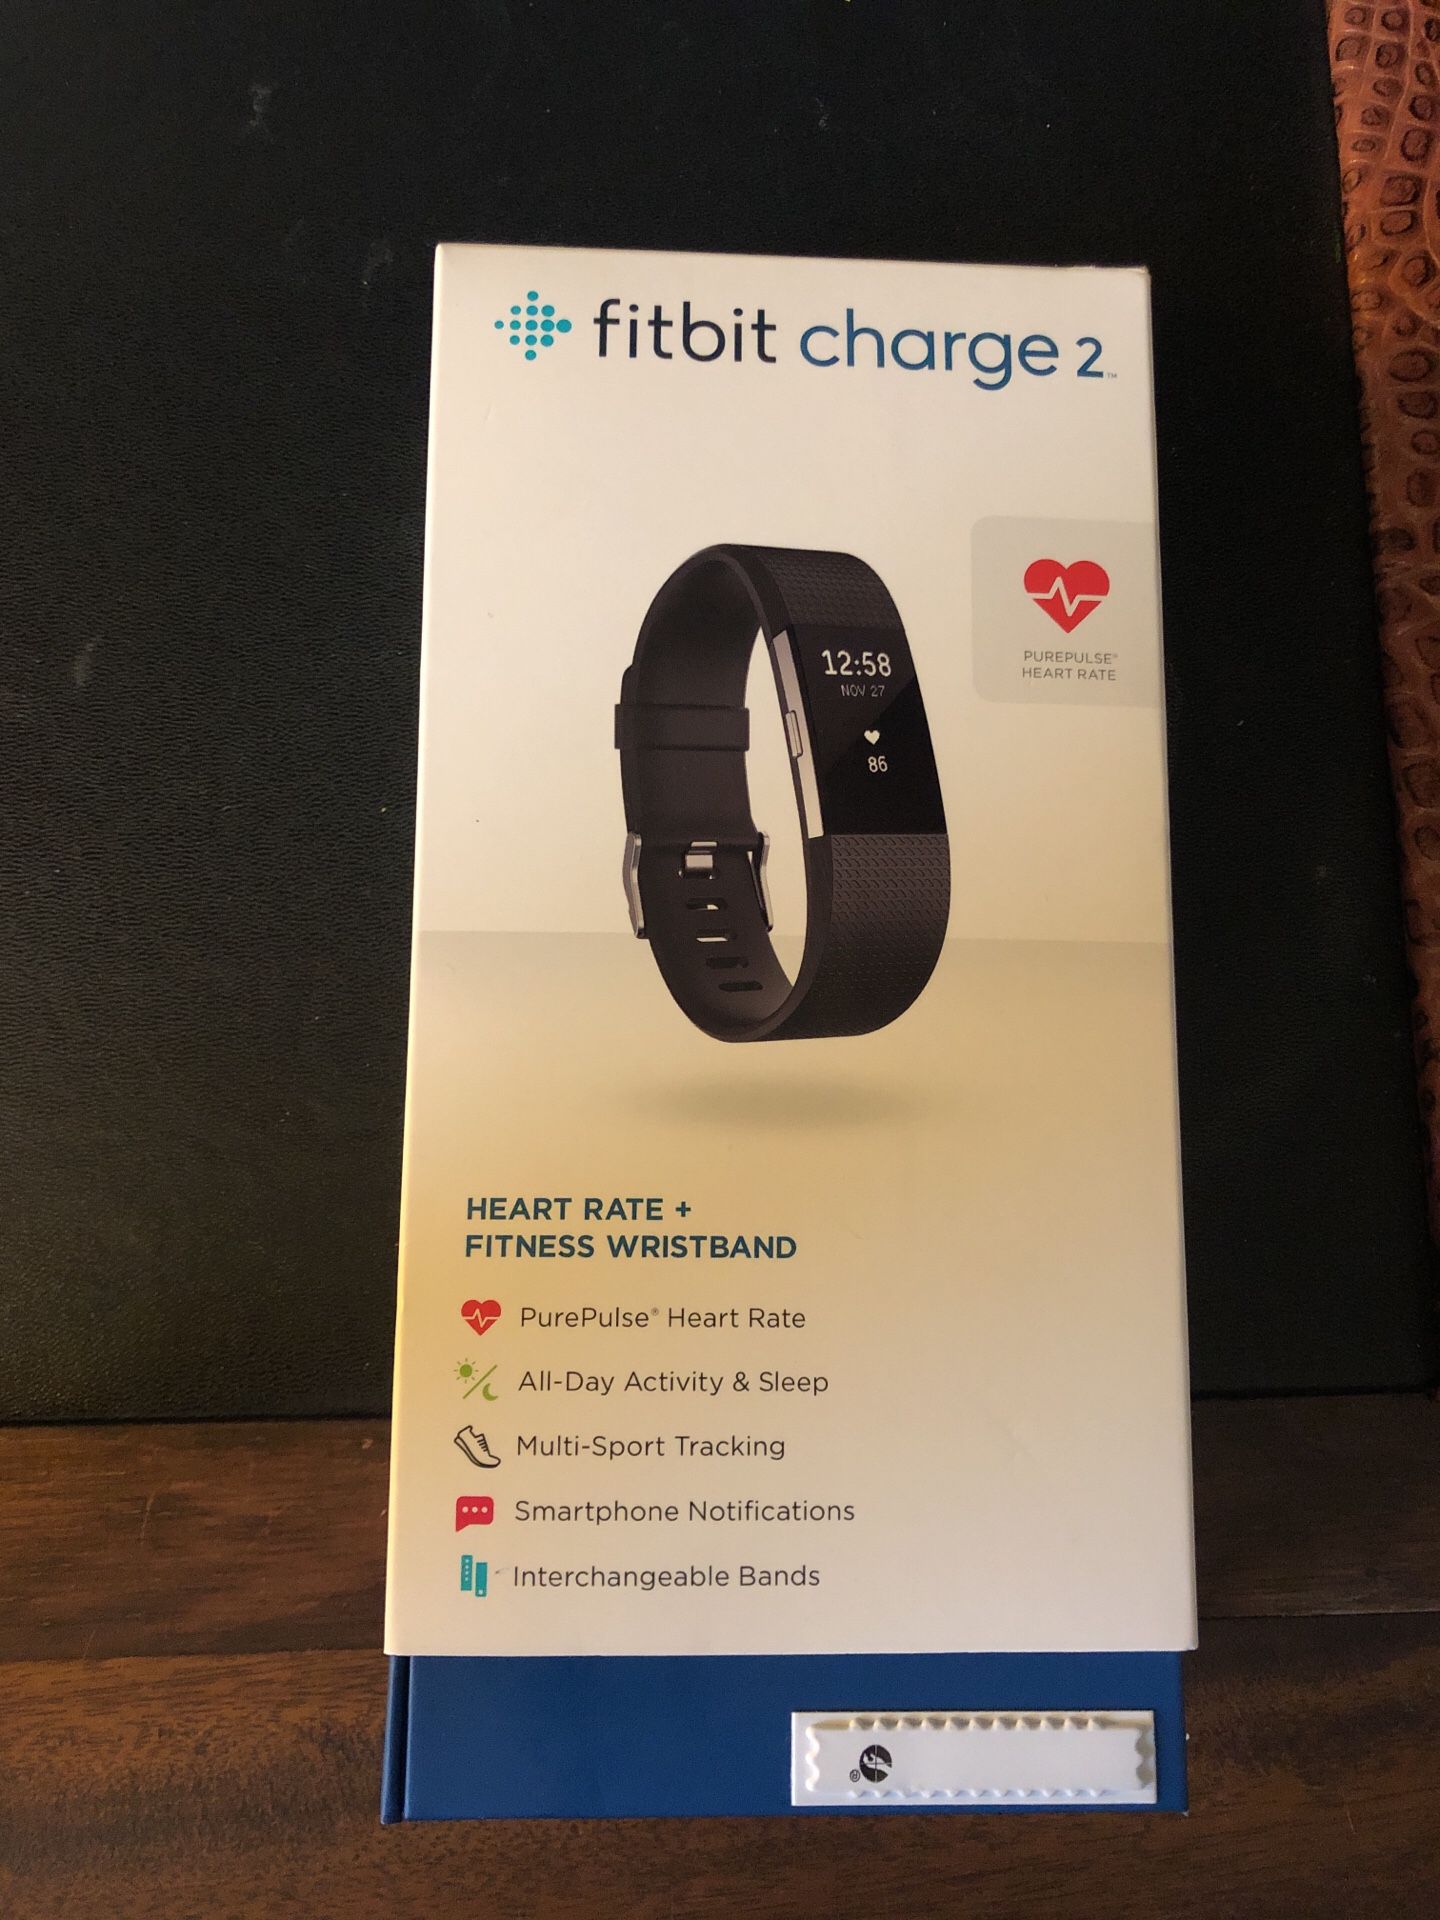 Fit bit charge 2